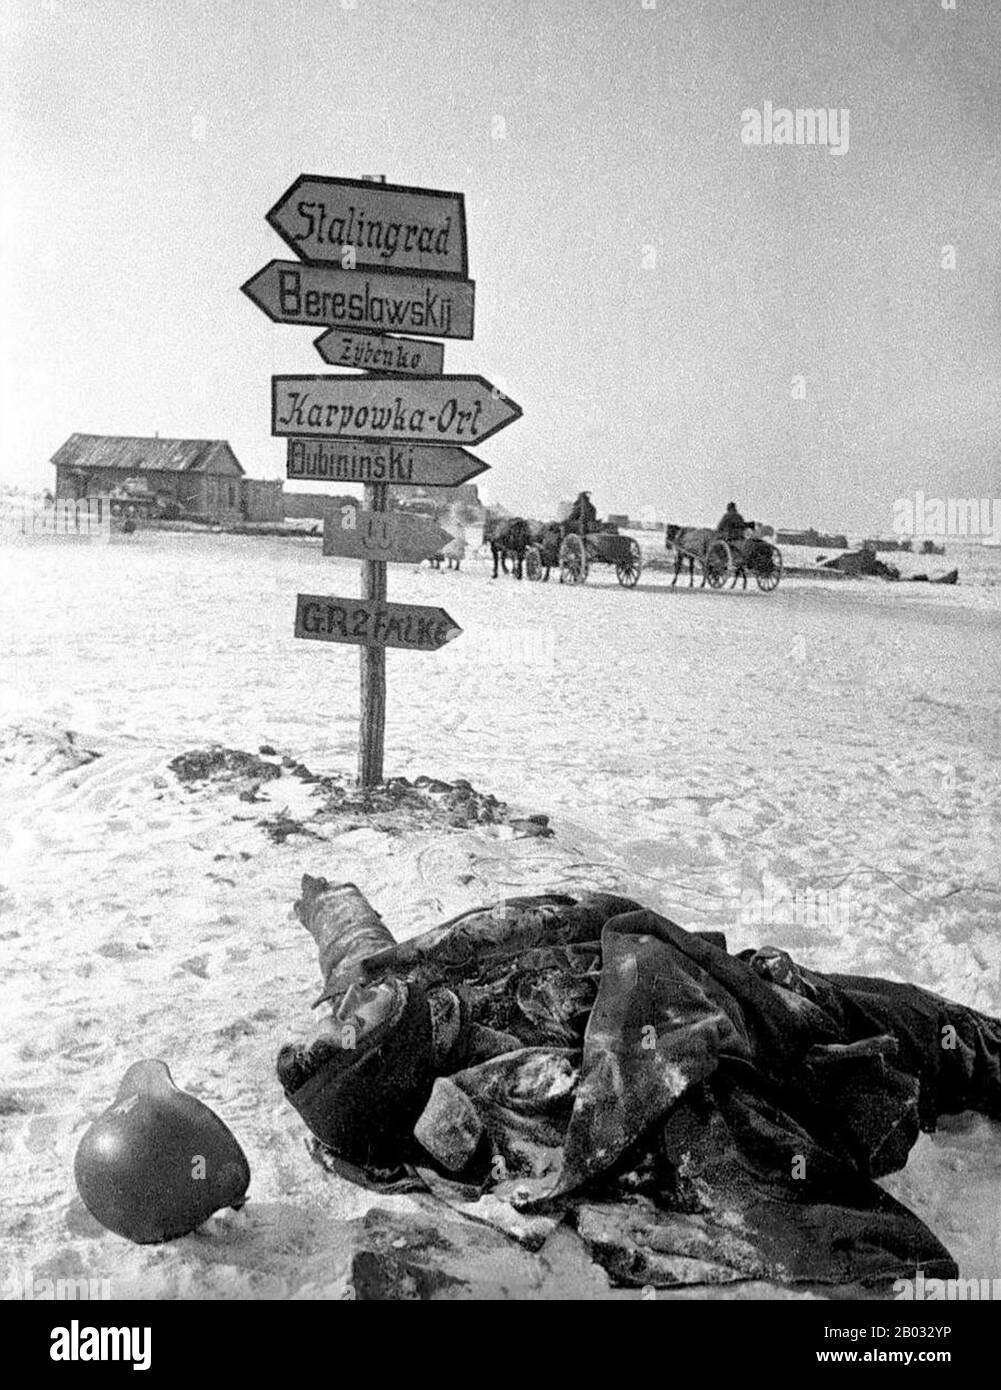 The Battle of Stalingrad (23 August 1942 – 2 February 1943) was a major battle on the Eastern Front of World War II in which Nazi Germany and its allies fought the Soviet Union for control of the city of Stalingrad (now Volgograd) in Southern Russia, near the eastern boundary of Europe.  Marked by constant close quarters combat and direct assaults on civilians by air raids, it is often regarded as one of the single largest (nearly 2.2 million personnel) and bloodiest (1.7–2 million wounded, killed or captured) battles in the history of warfare. The heavy losses inflicted on the German Wehrmach Stock Photo